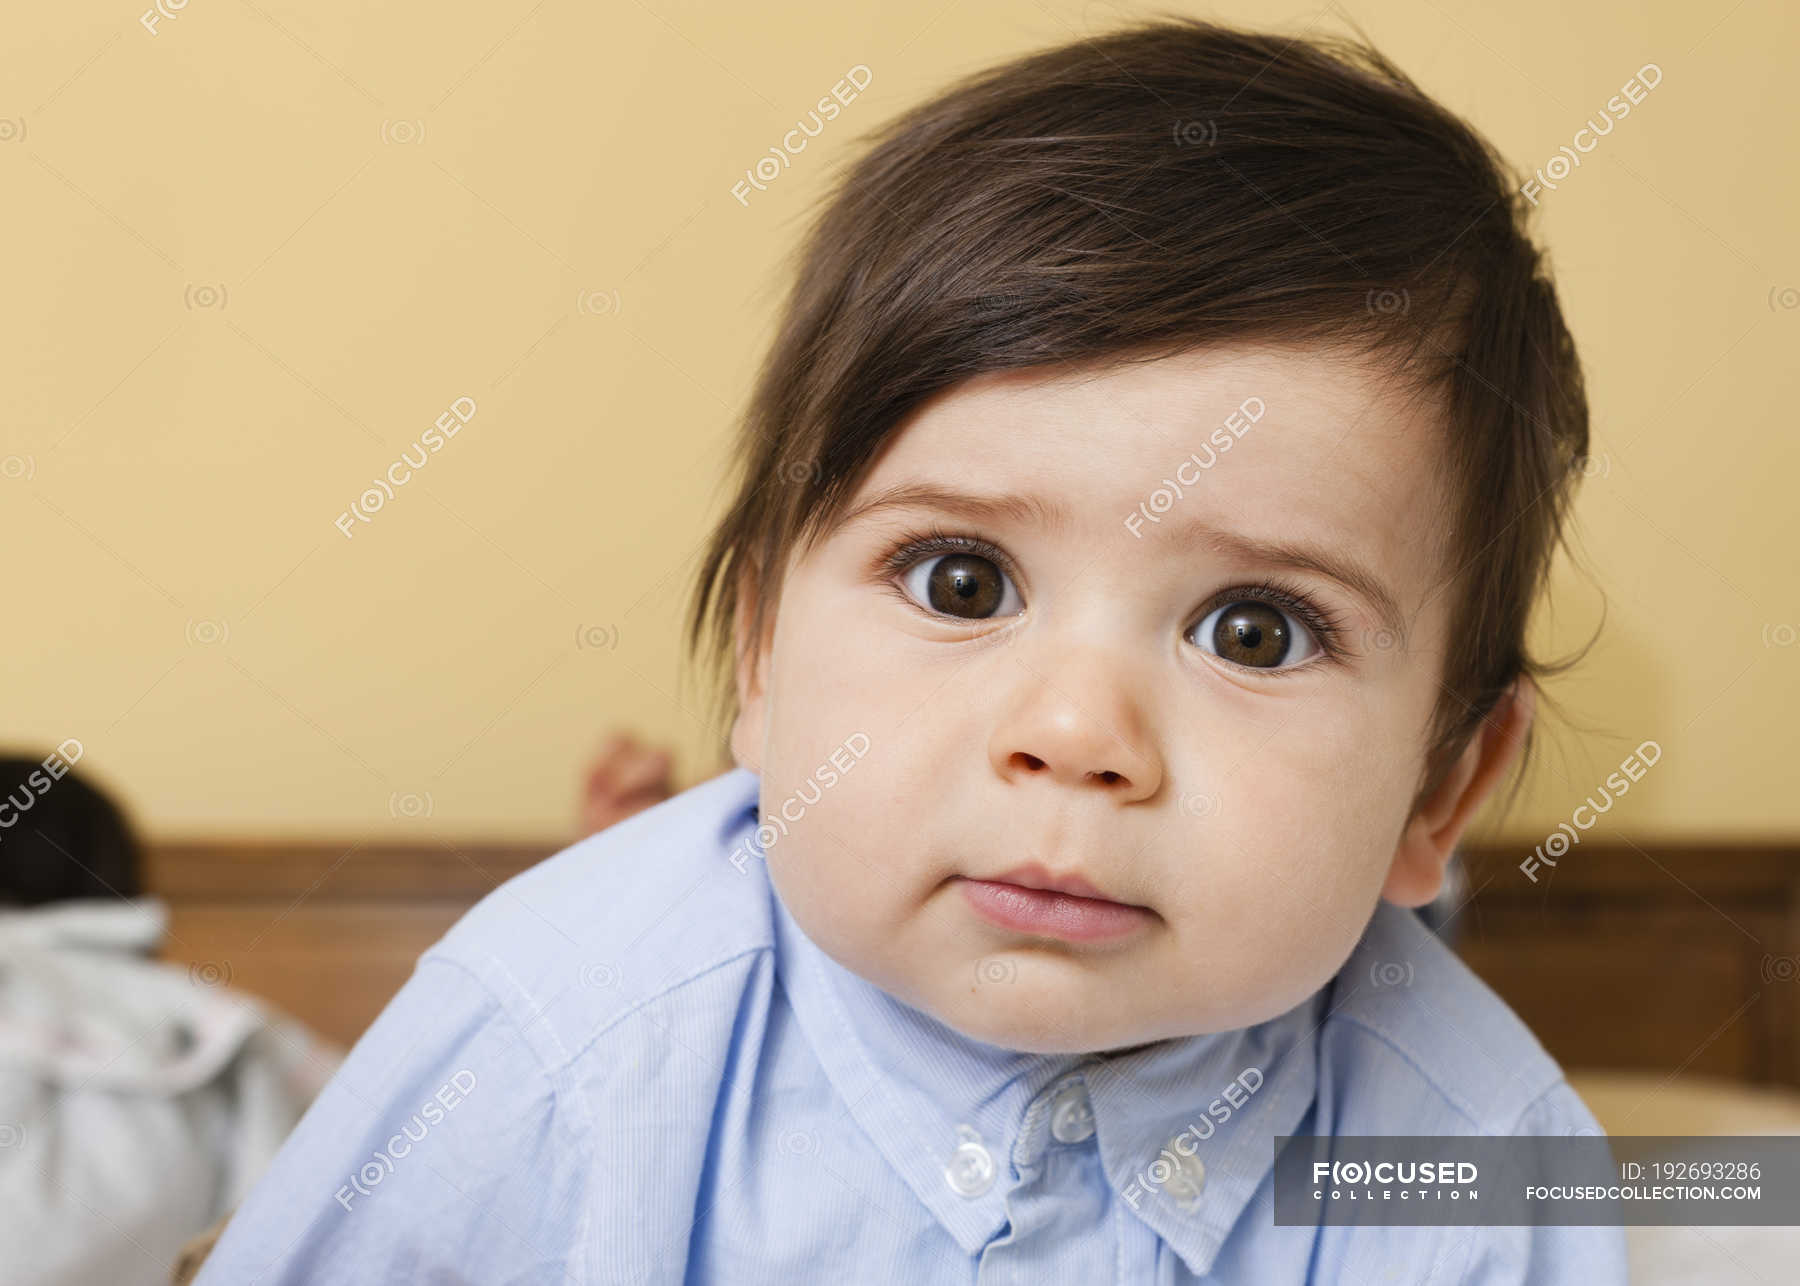 Toddler child with brown eyes and black hair looking in camera. — close up,  one person - Stock Photo | #192693286